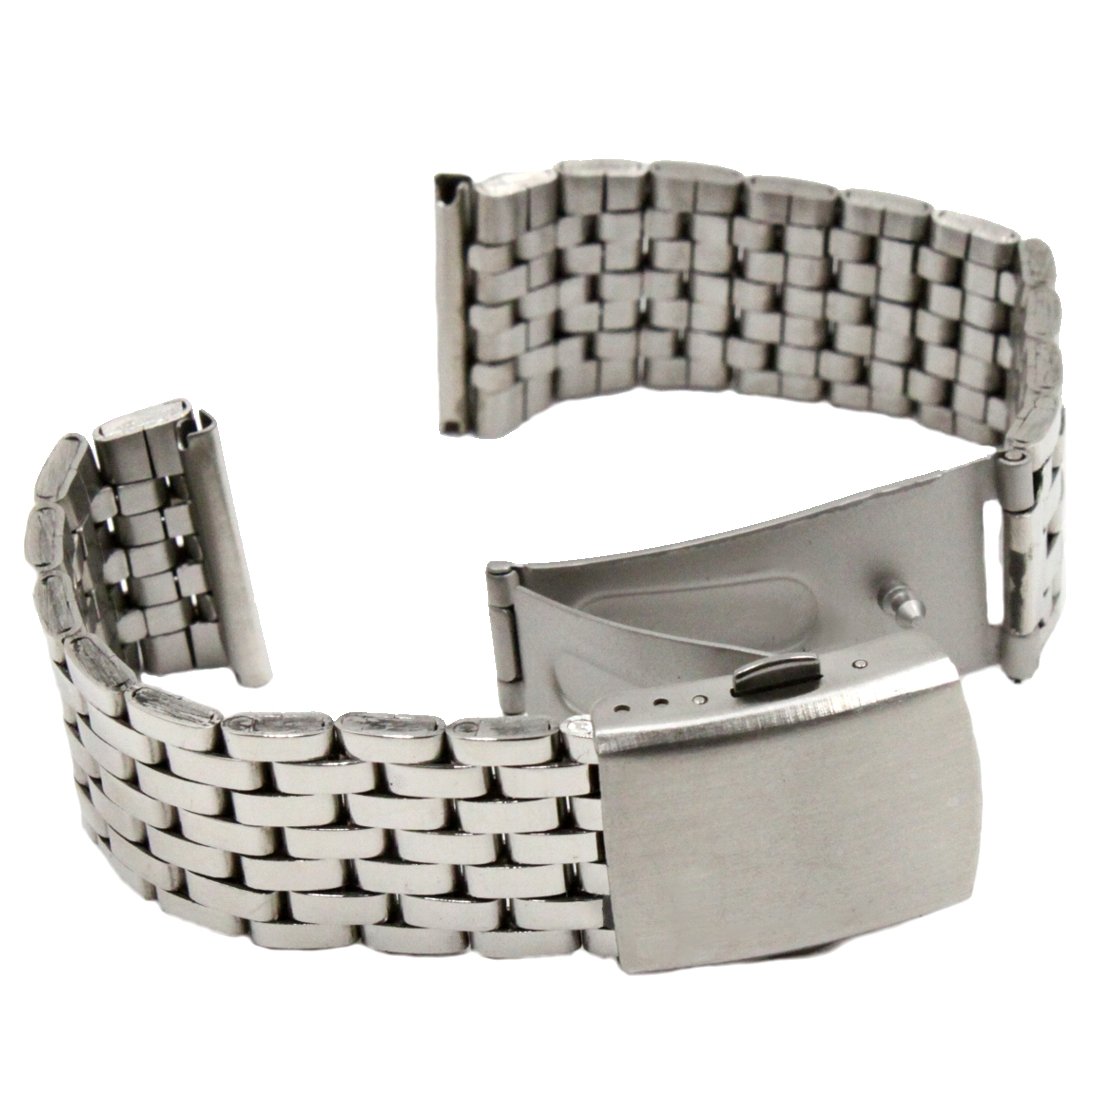 18mm Stainless Steel Unisex Watch Band Straps WB1231A18SB | Gifts-You ...